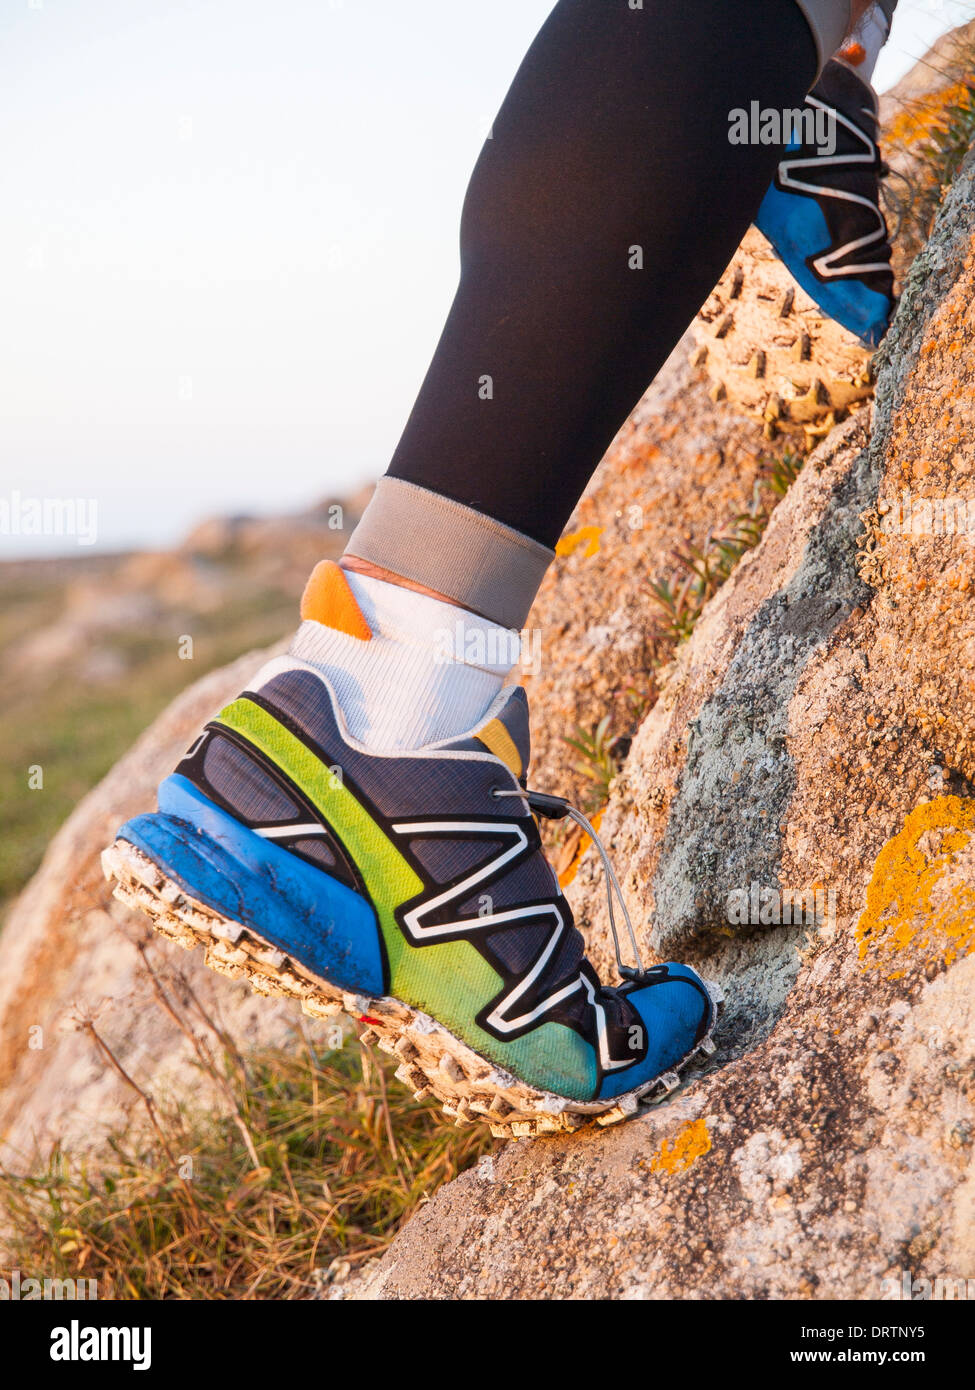 Extreme sports shoes for trail running practice in nature. Stock Photo